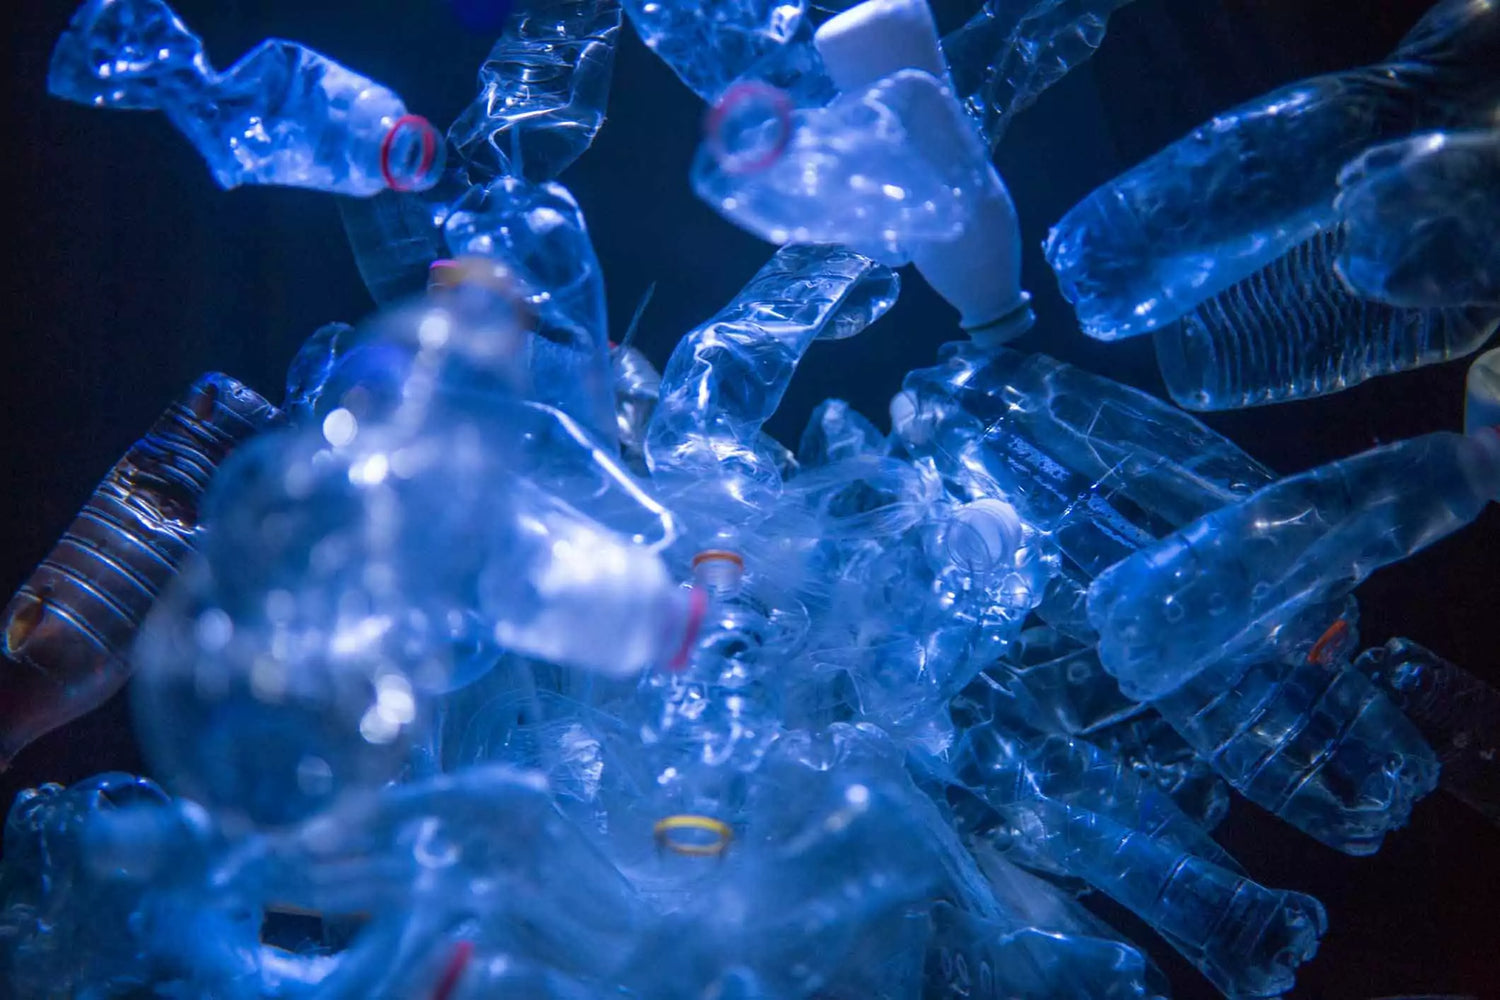 A group of plastic bottles creating a dark room in need of clean air.